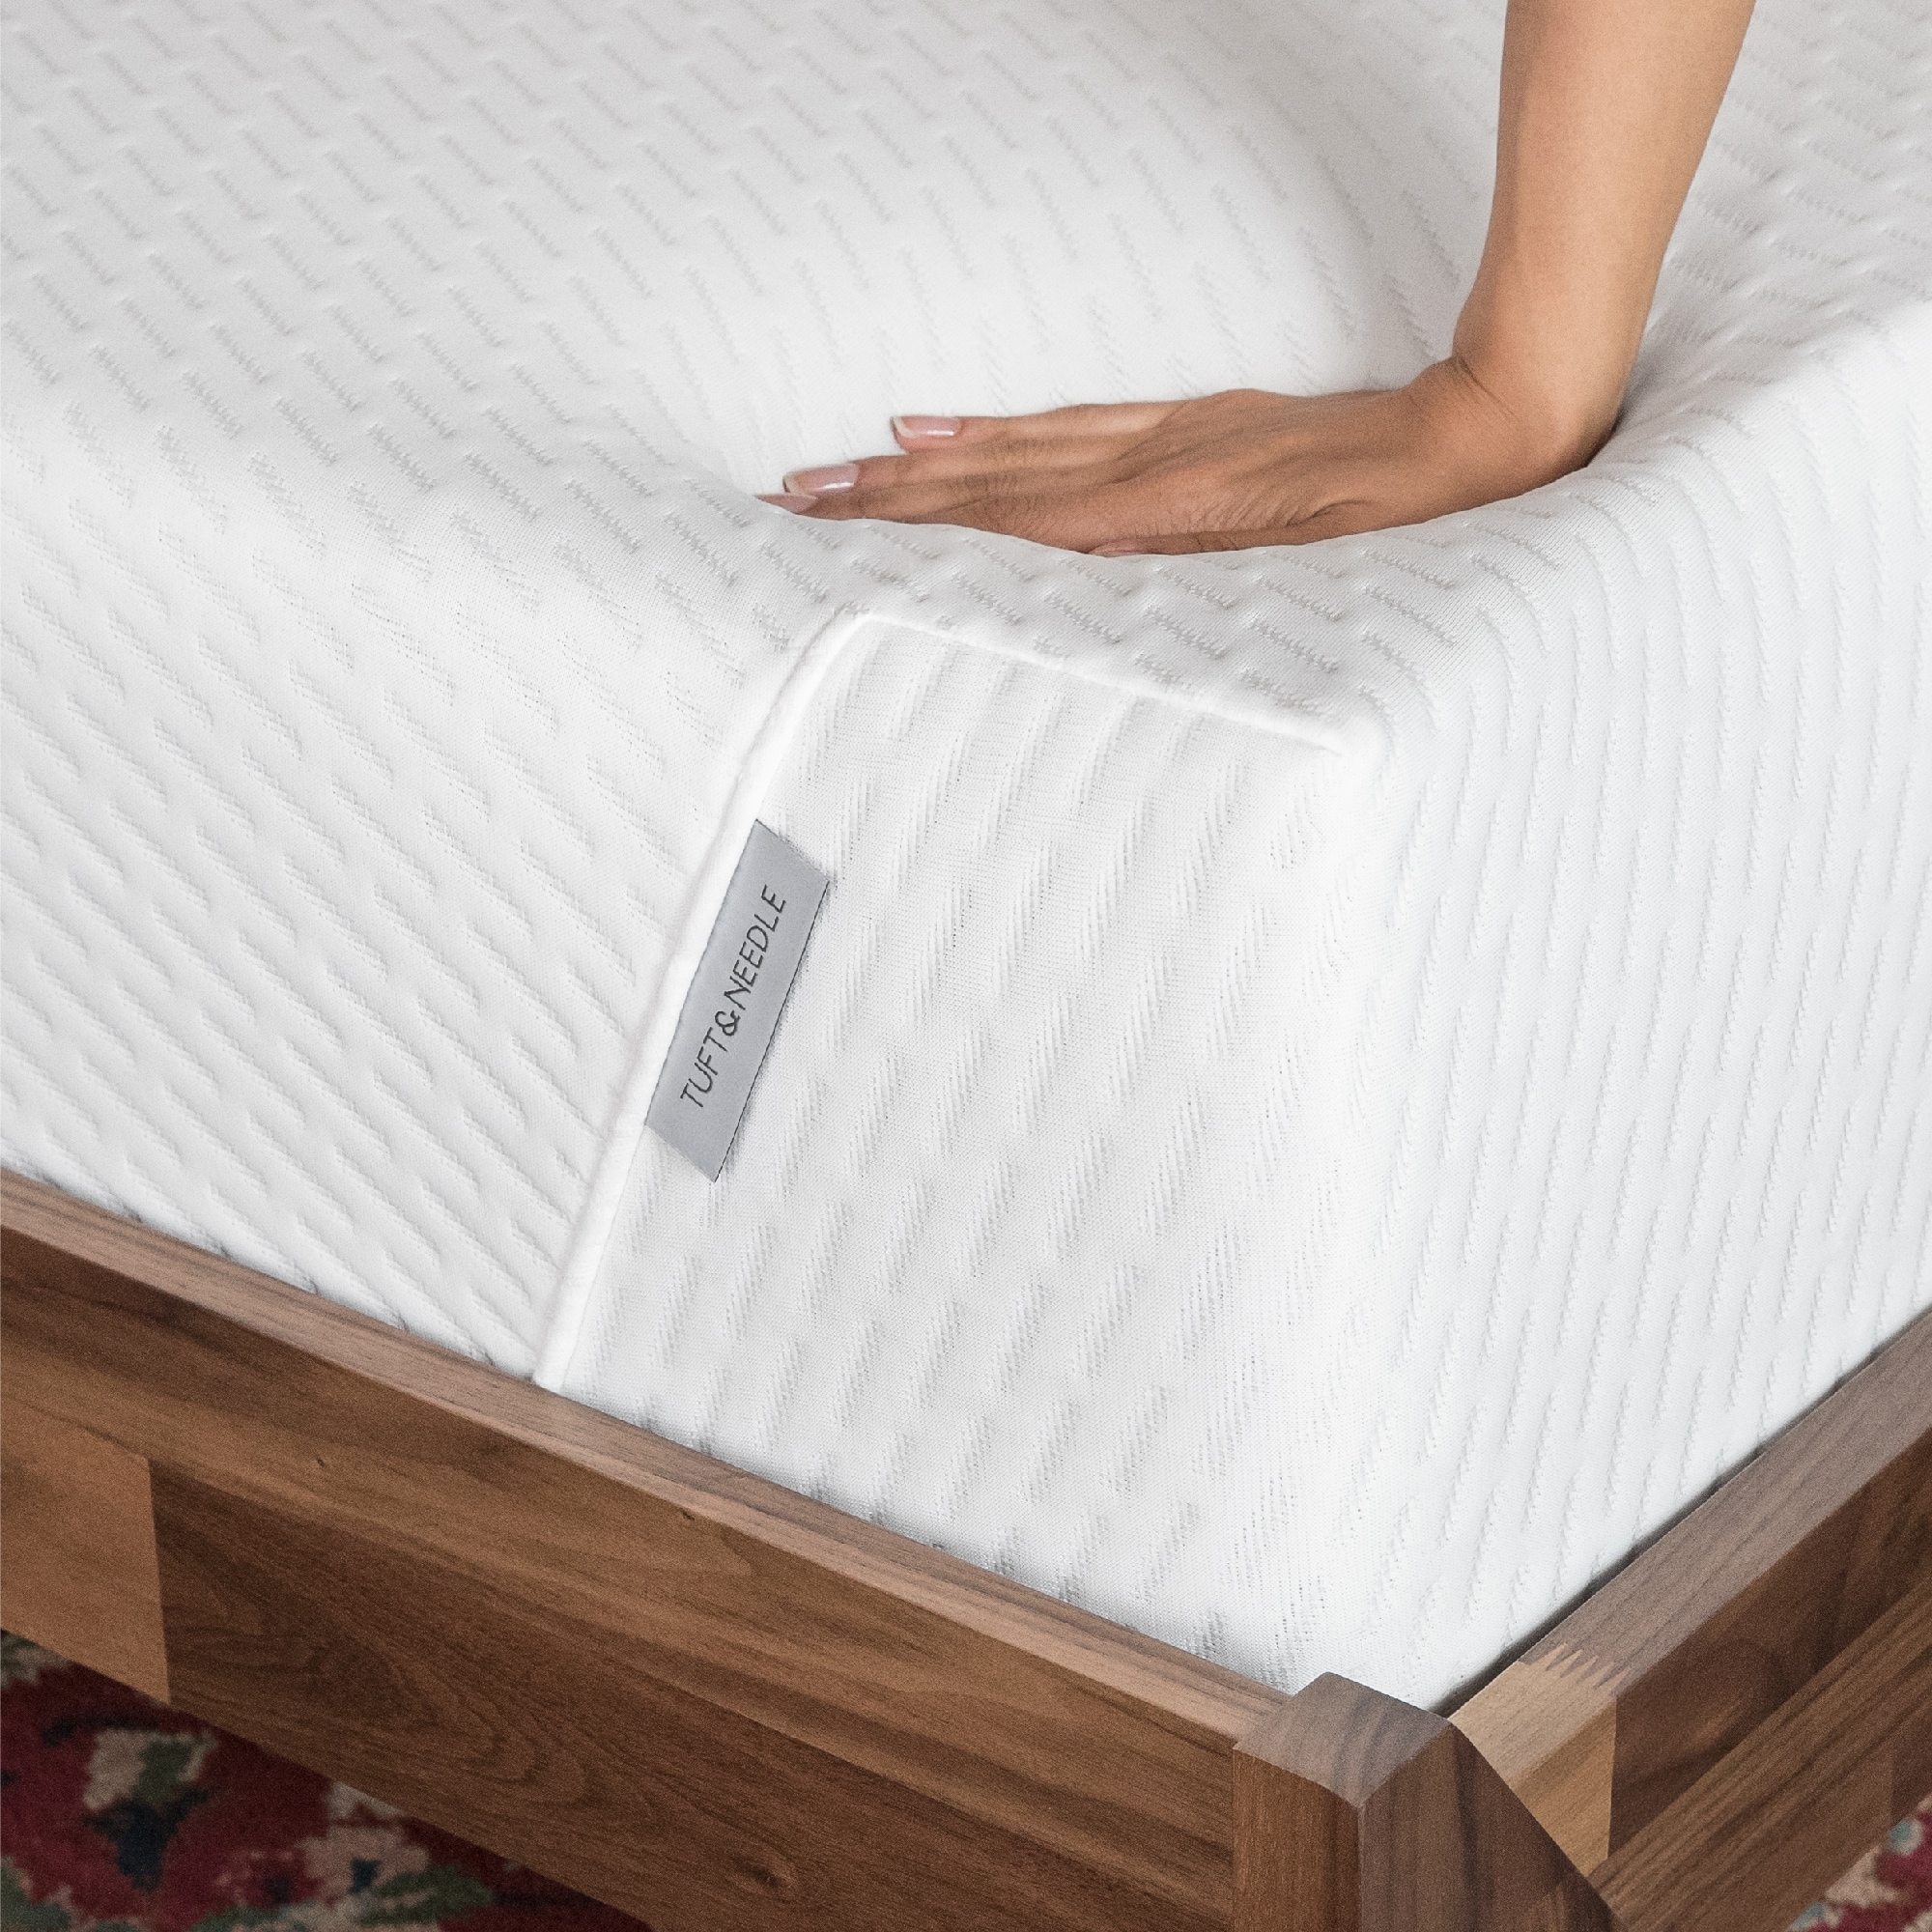 Tuft Needle 10 In Queen Foam Mattress, Tuft And Needle King Size Bed Dimensions